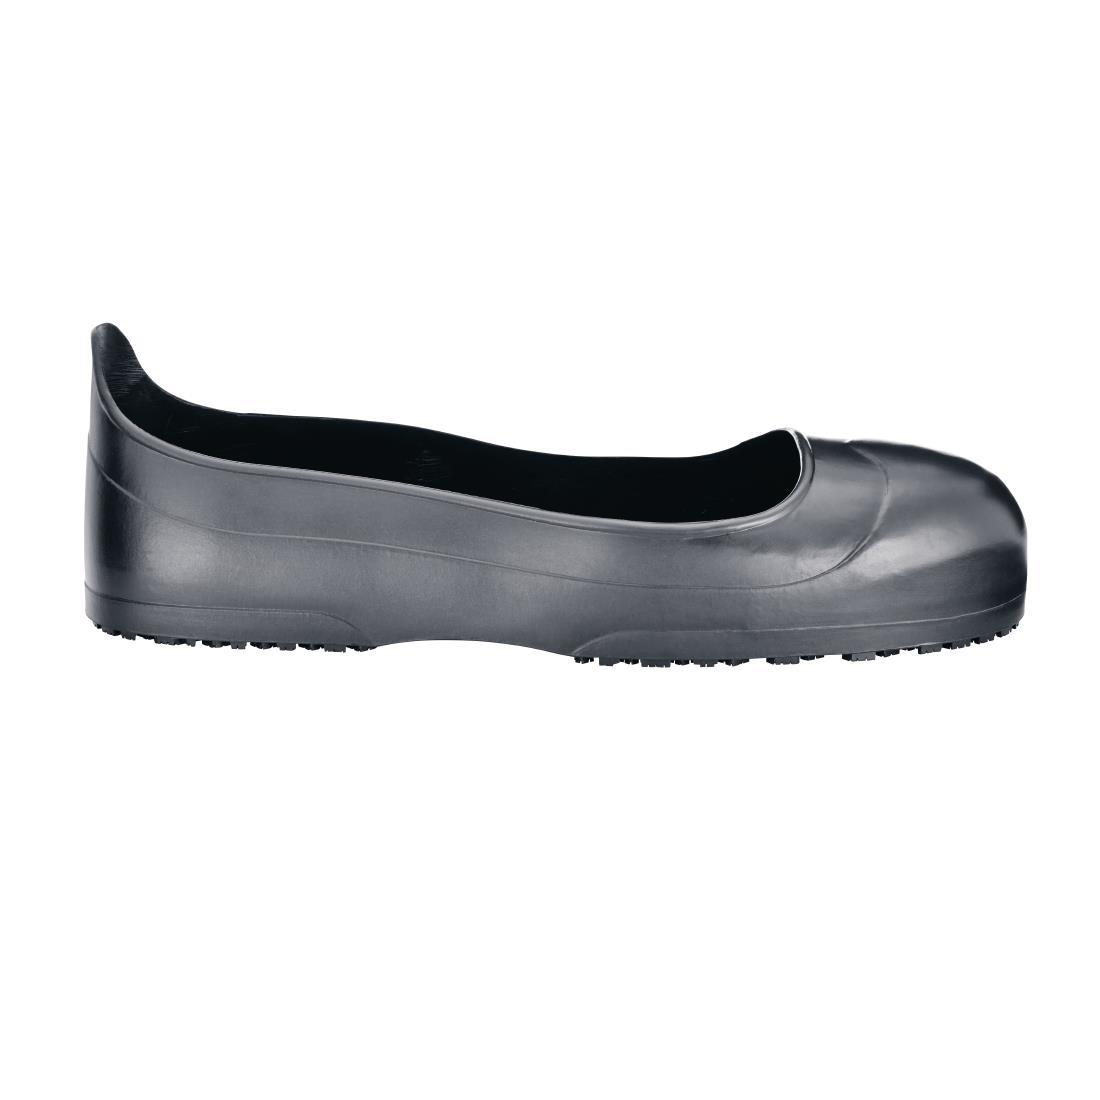 Shoes for Crews Crewguard Overshoes Steel Toe Cap Size MP - BB614-MP  - 1